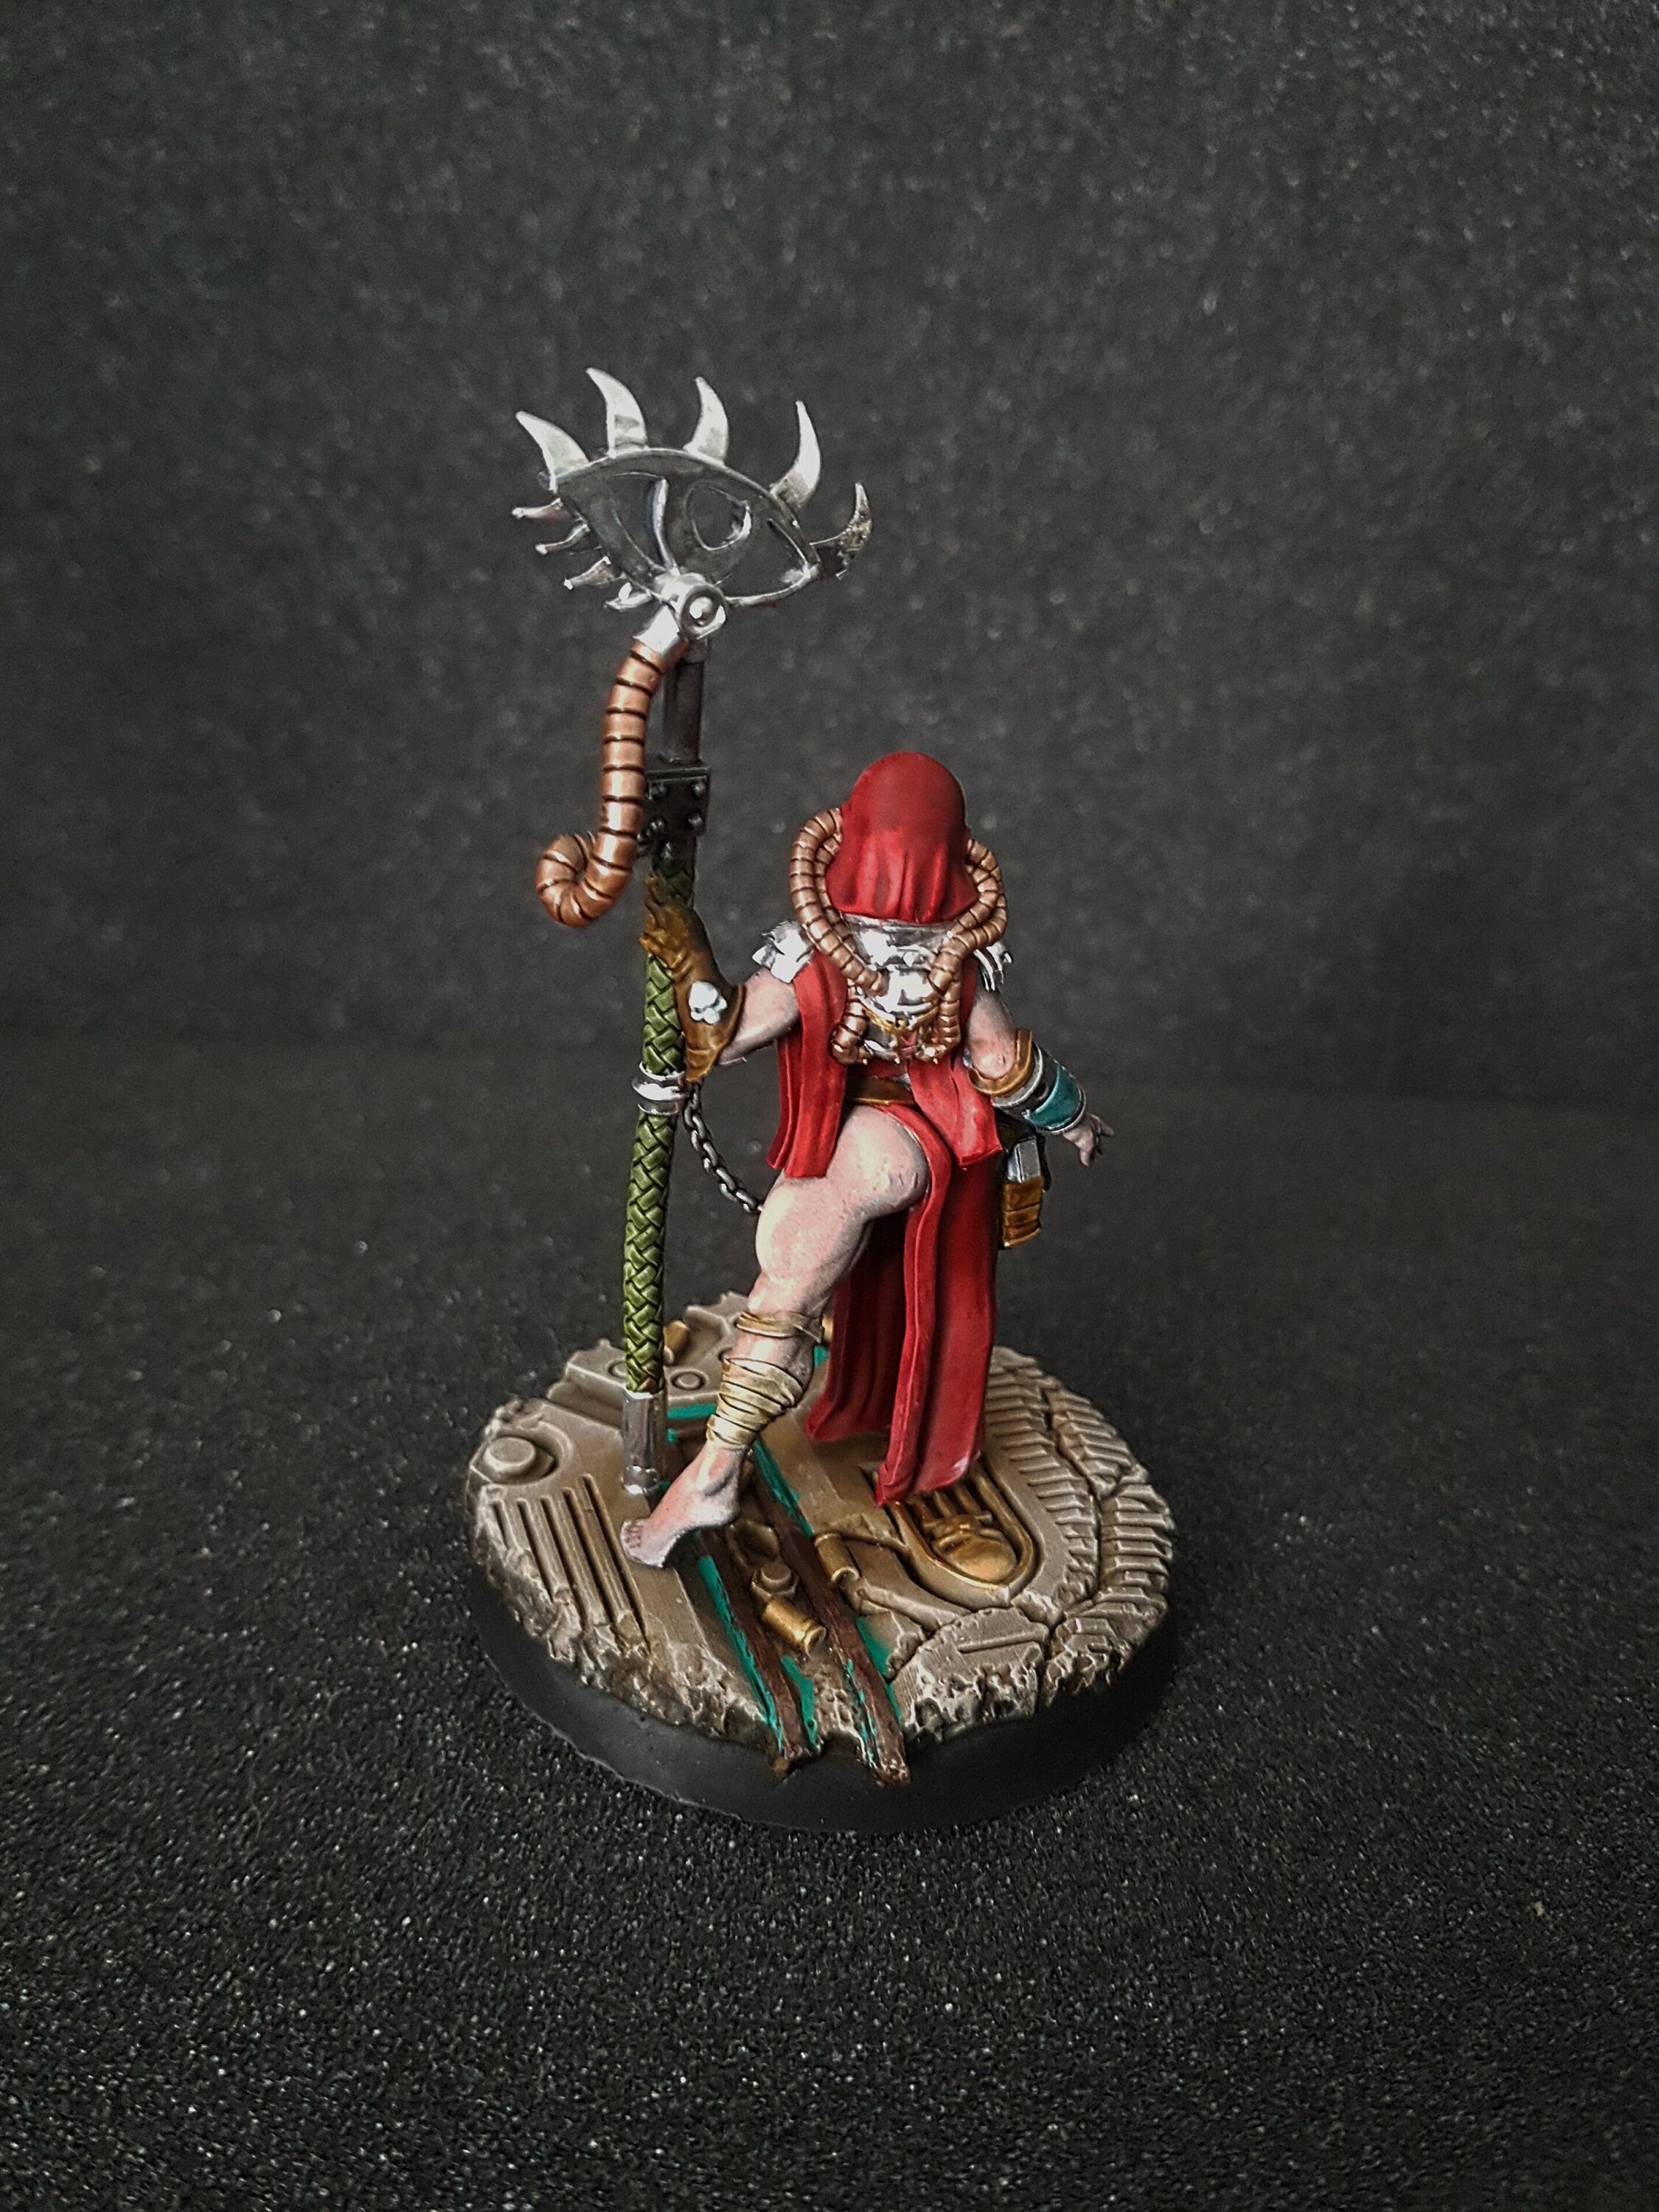 Pinup Corps Stormbabe Psychic - Across the Realms | 28mm